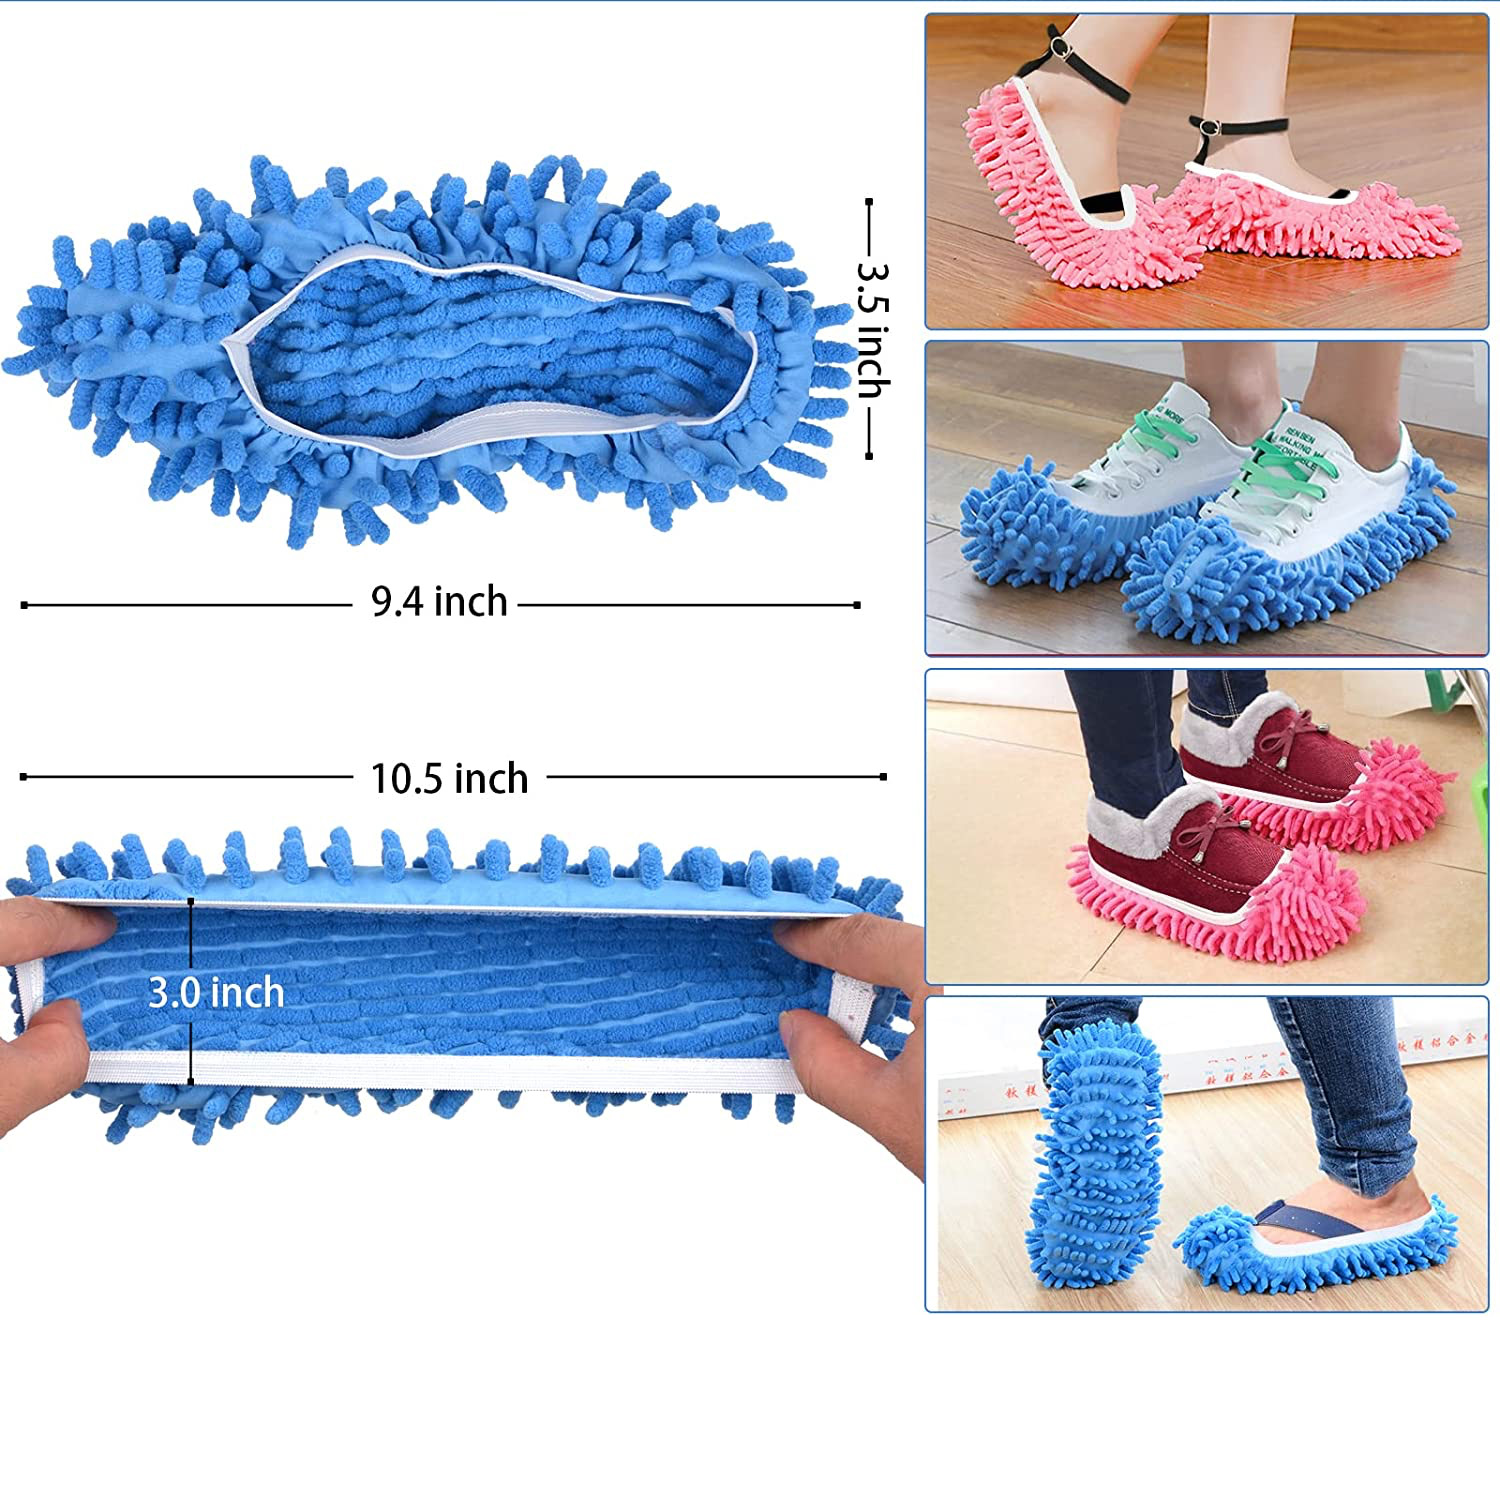 Mop Slippers for Floor Cleaning Washable Shoes Cover Soft Microfiber Dust Mops Mop Socks Reusable for Women Men Kids Foot Dust 